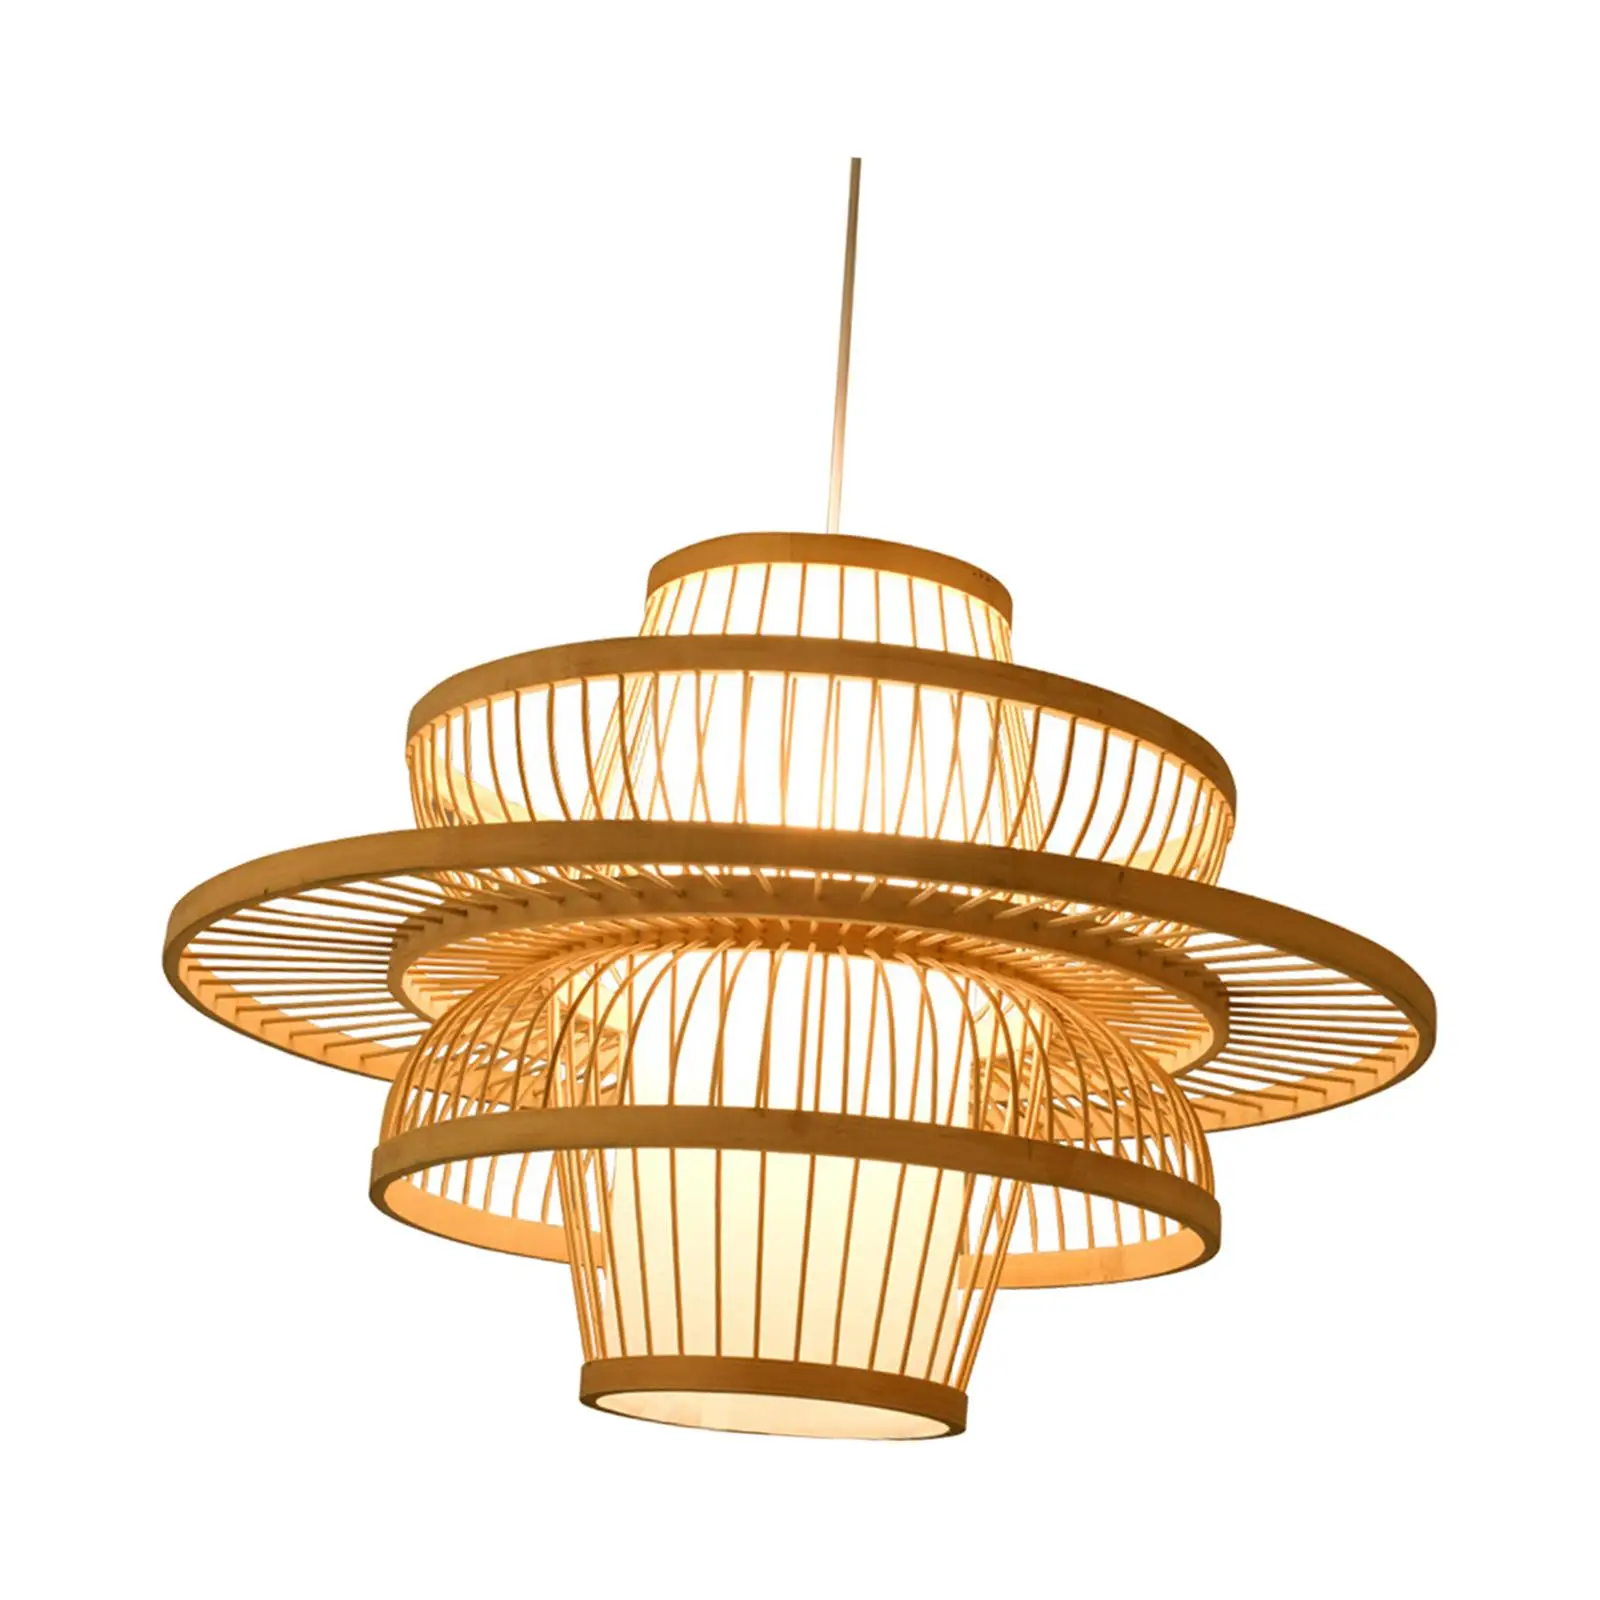 Retro Style Handwoven Bamboo Lamp Shade Pendant Light Cover Chandelier Hanging for Restaurant Kitchen Teahouse Cafe